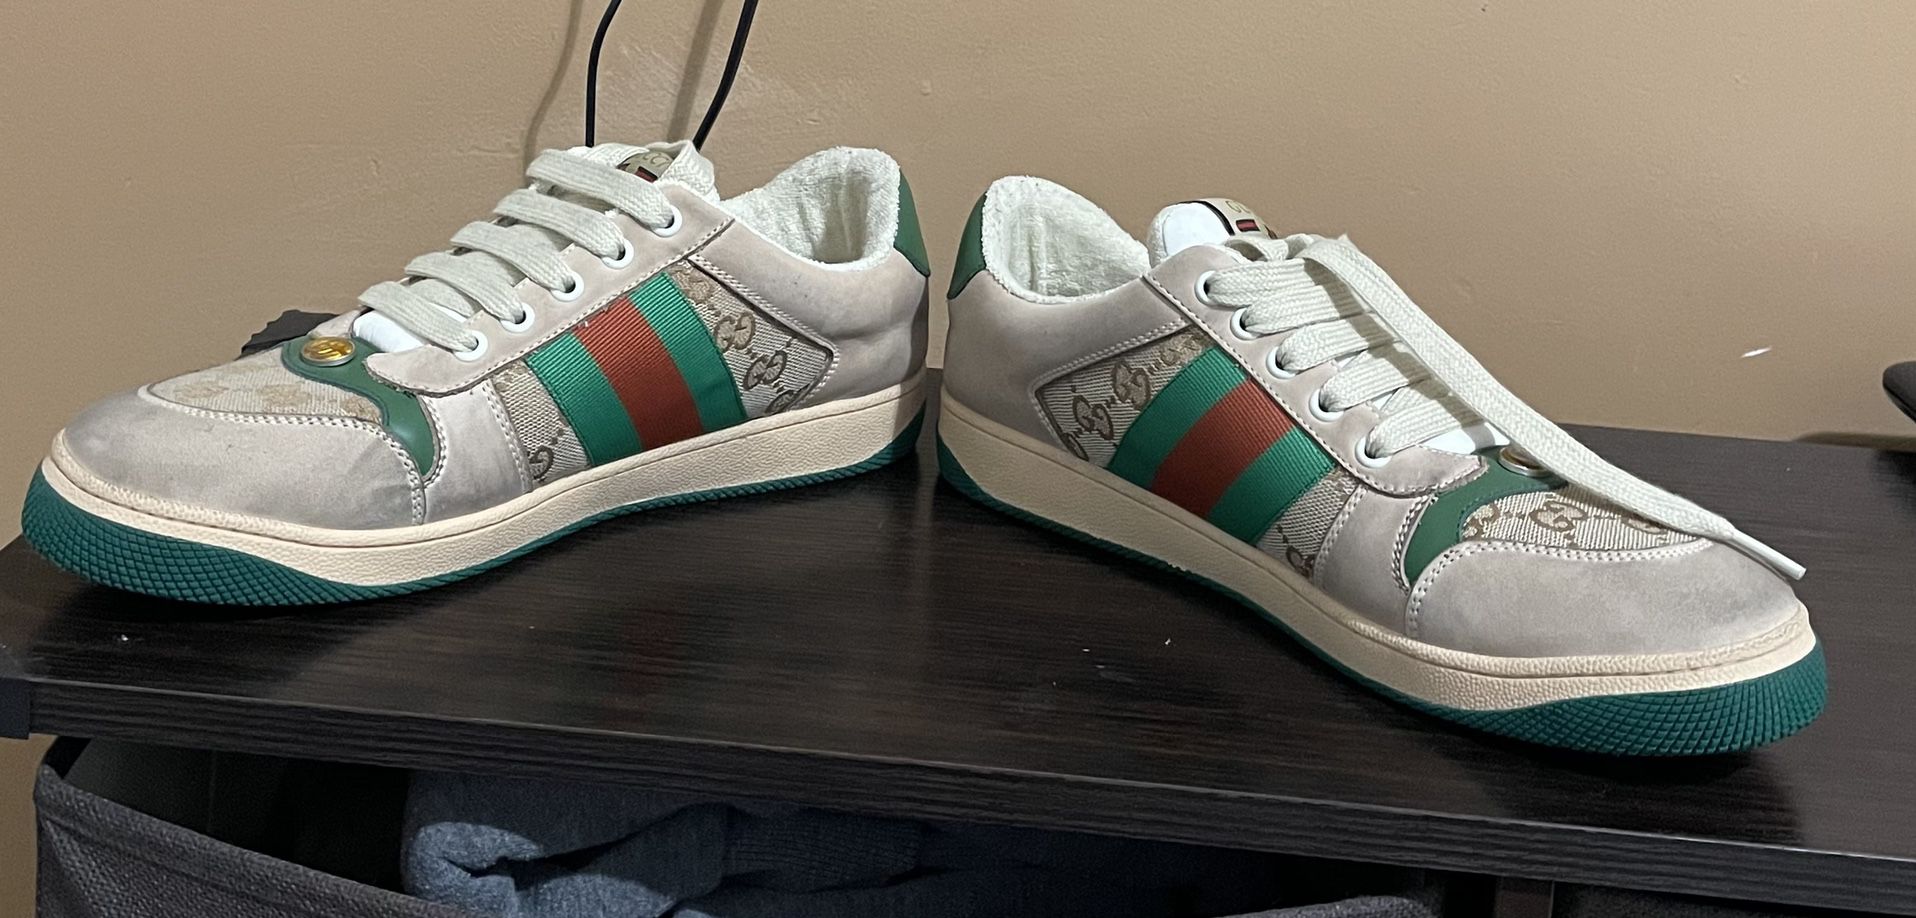 Gucci Sneakers Men - Never Worn (US Size 10)